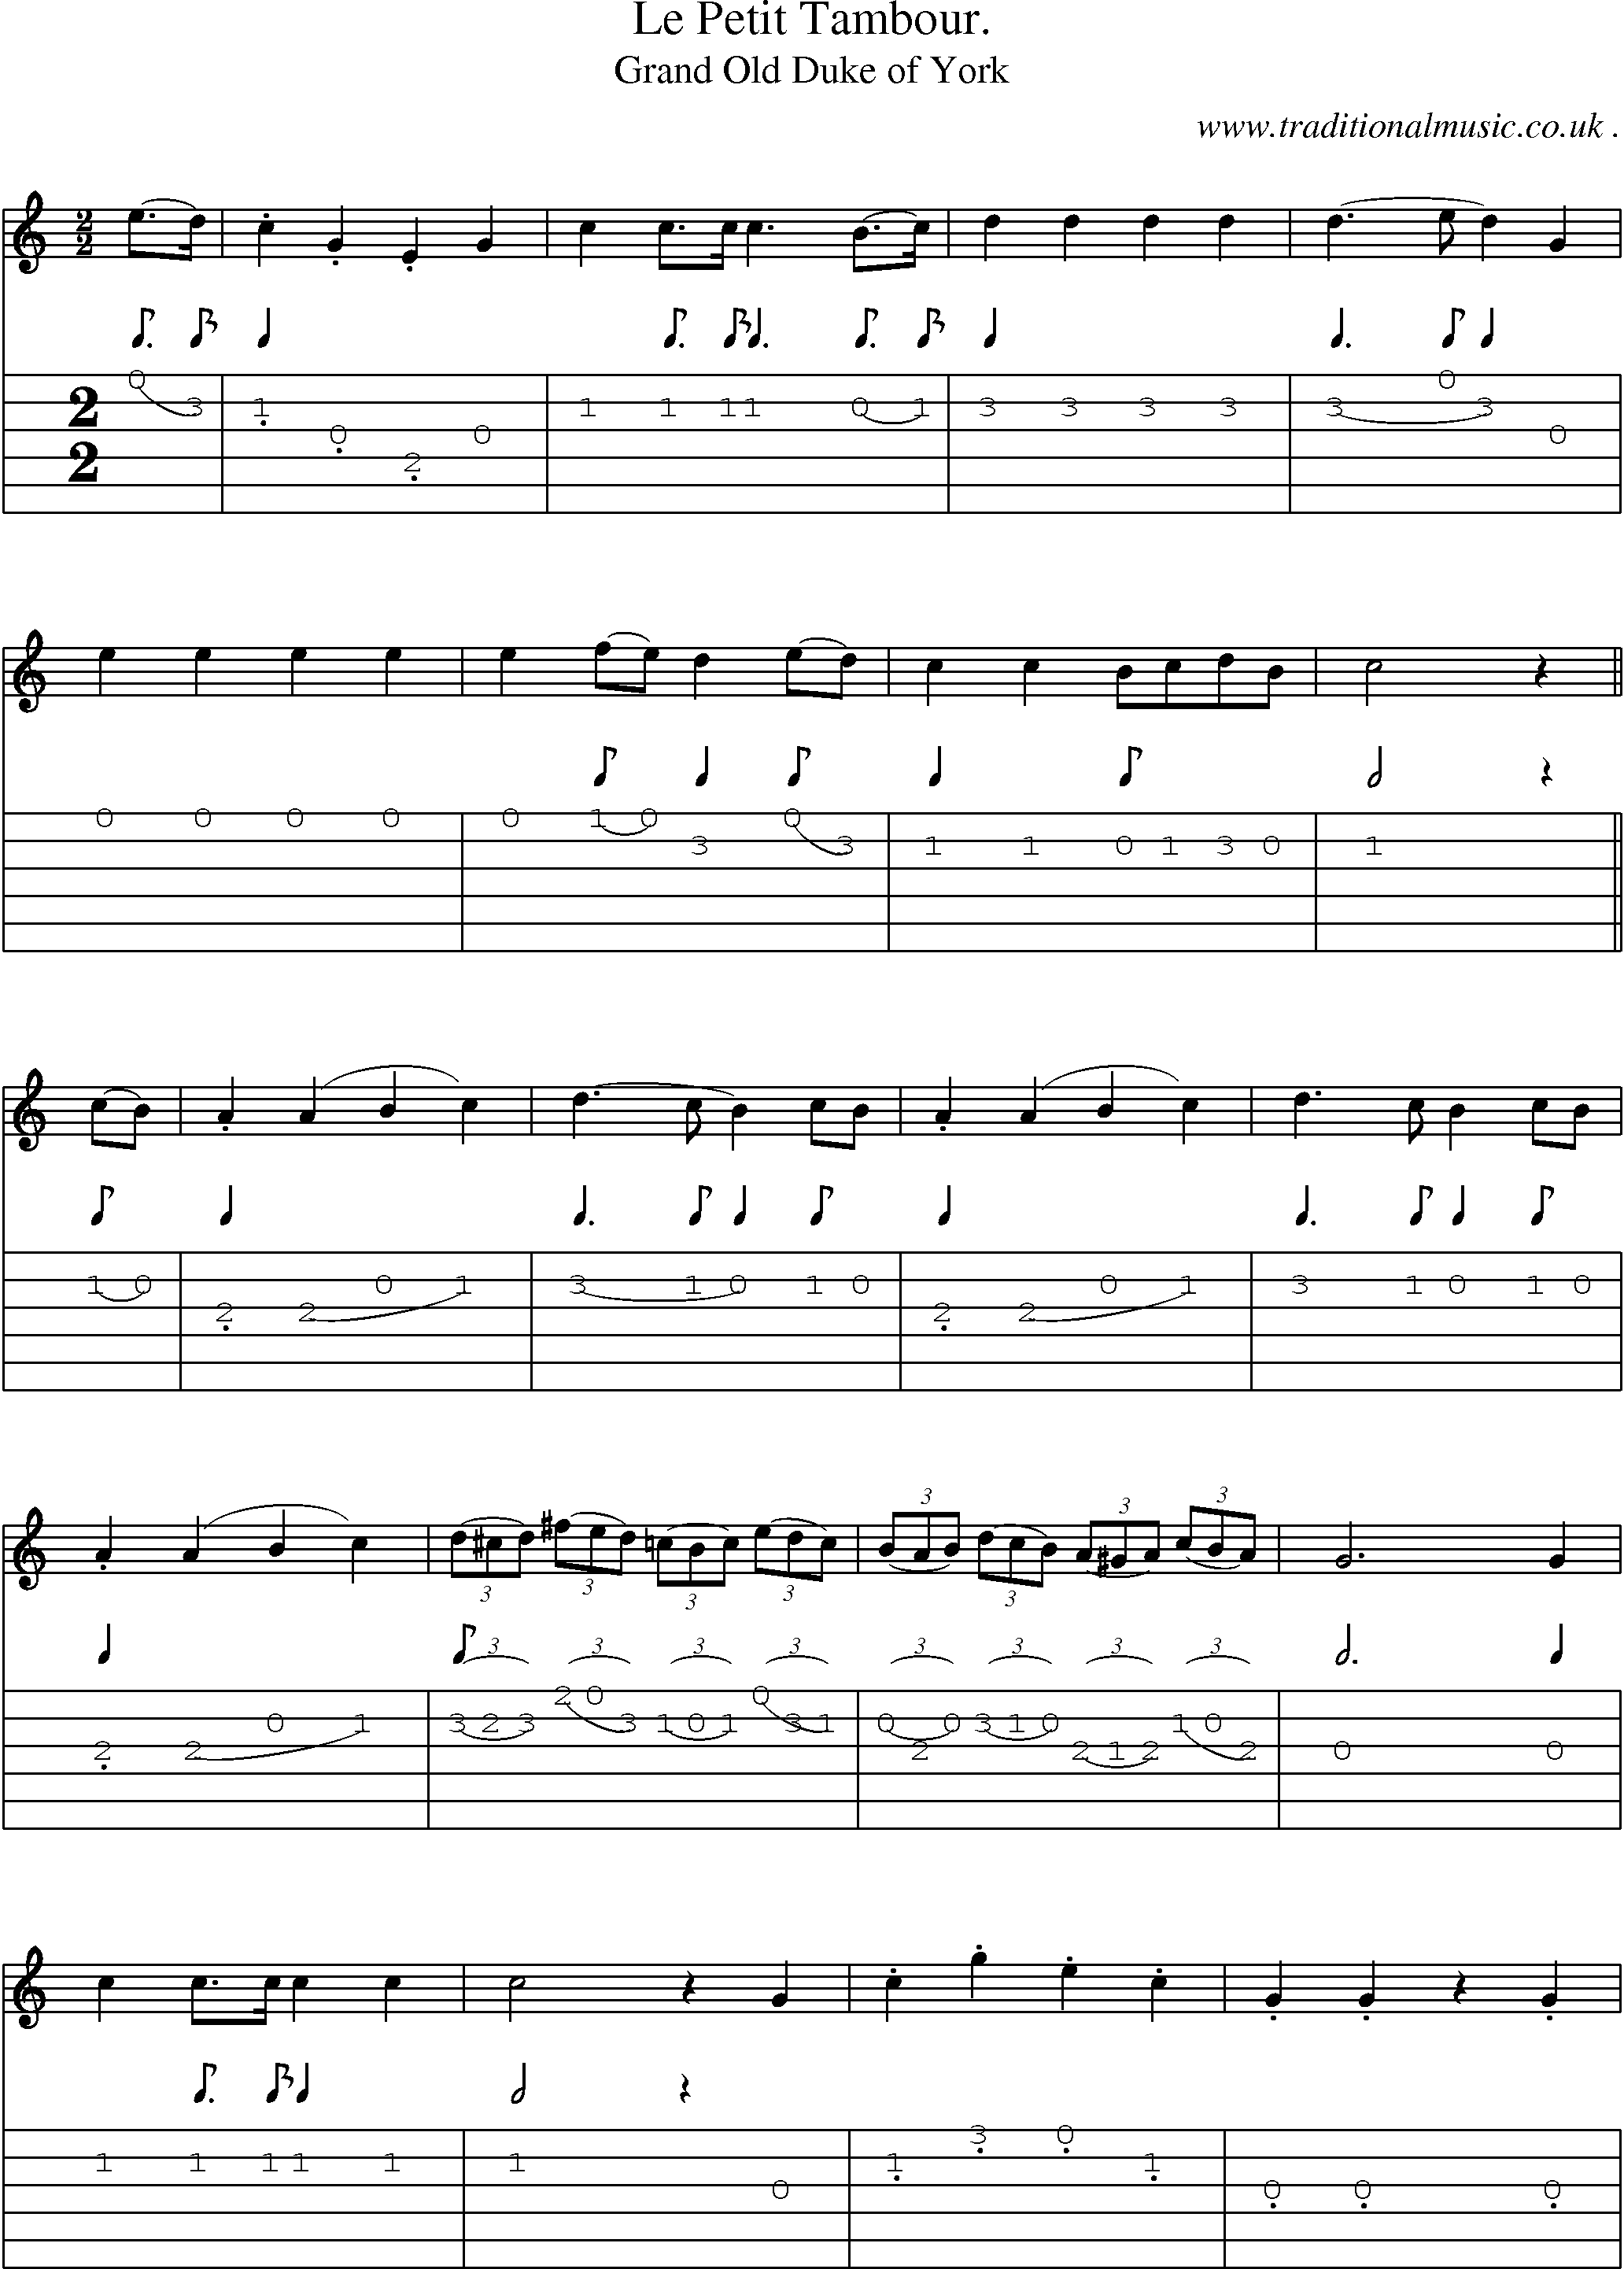 Sheet-Music and Guitar Tabs for Le Petit Tambour